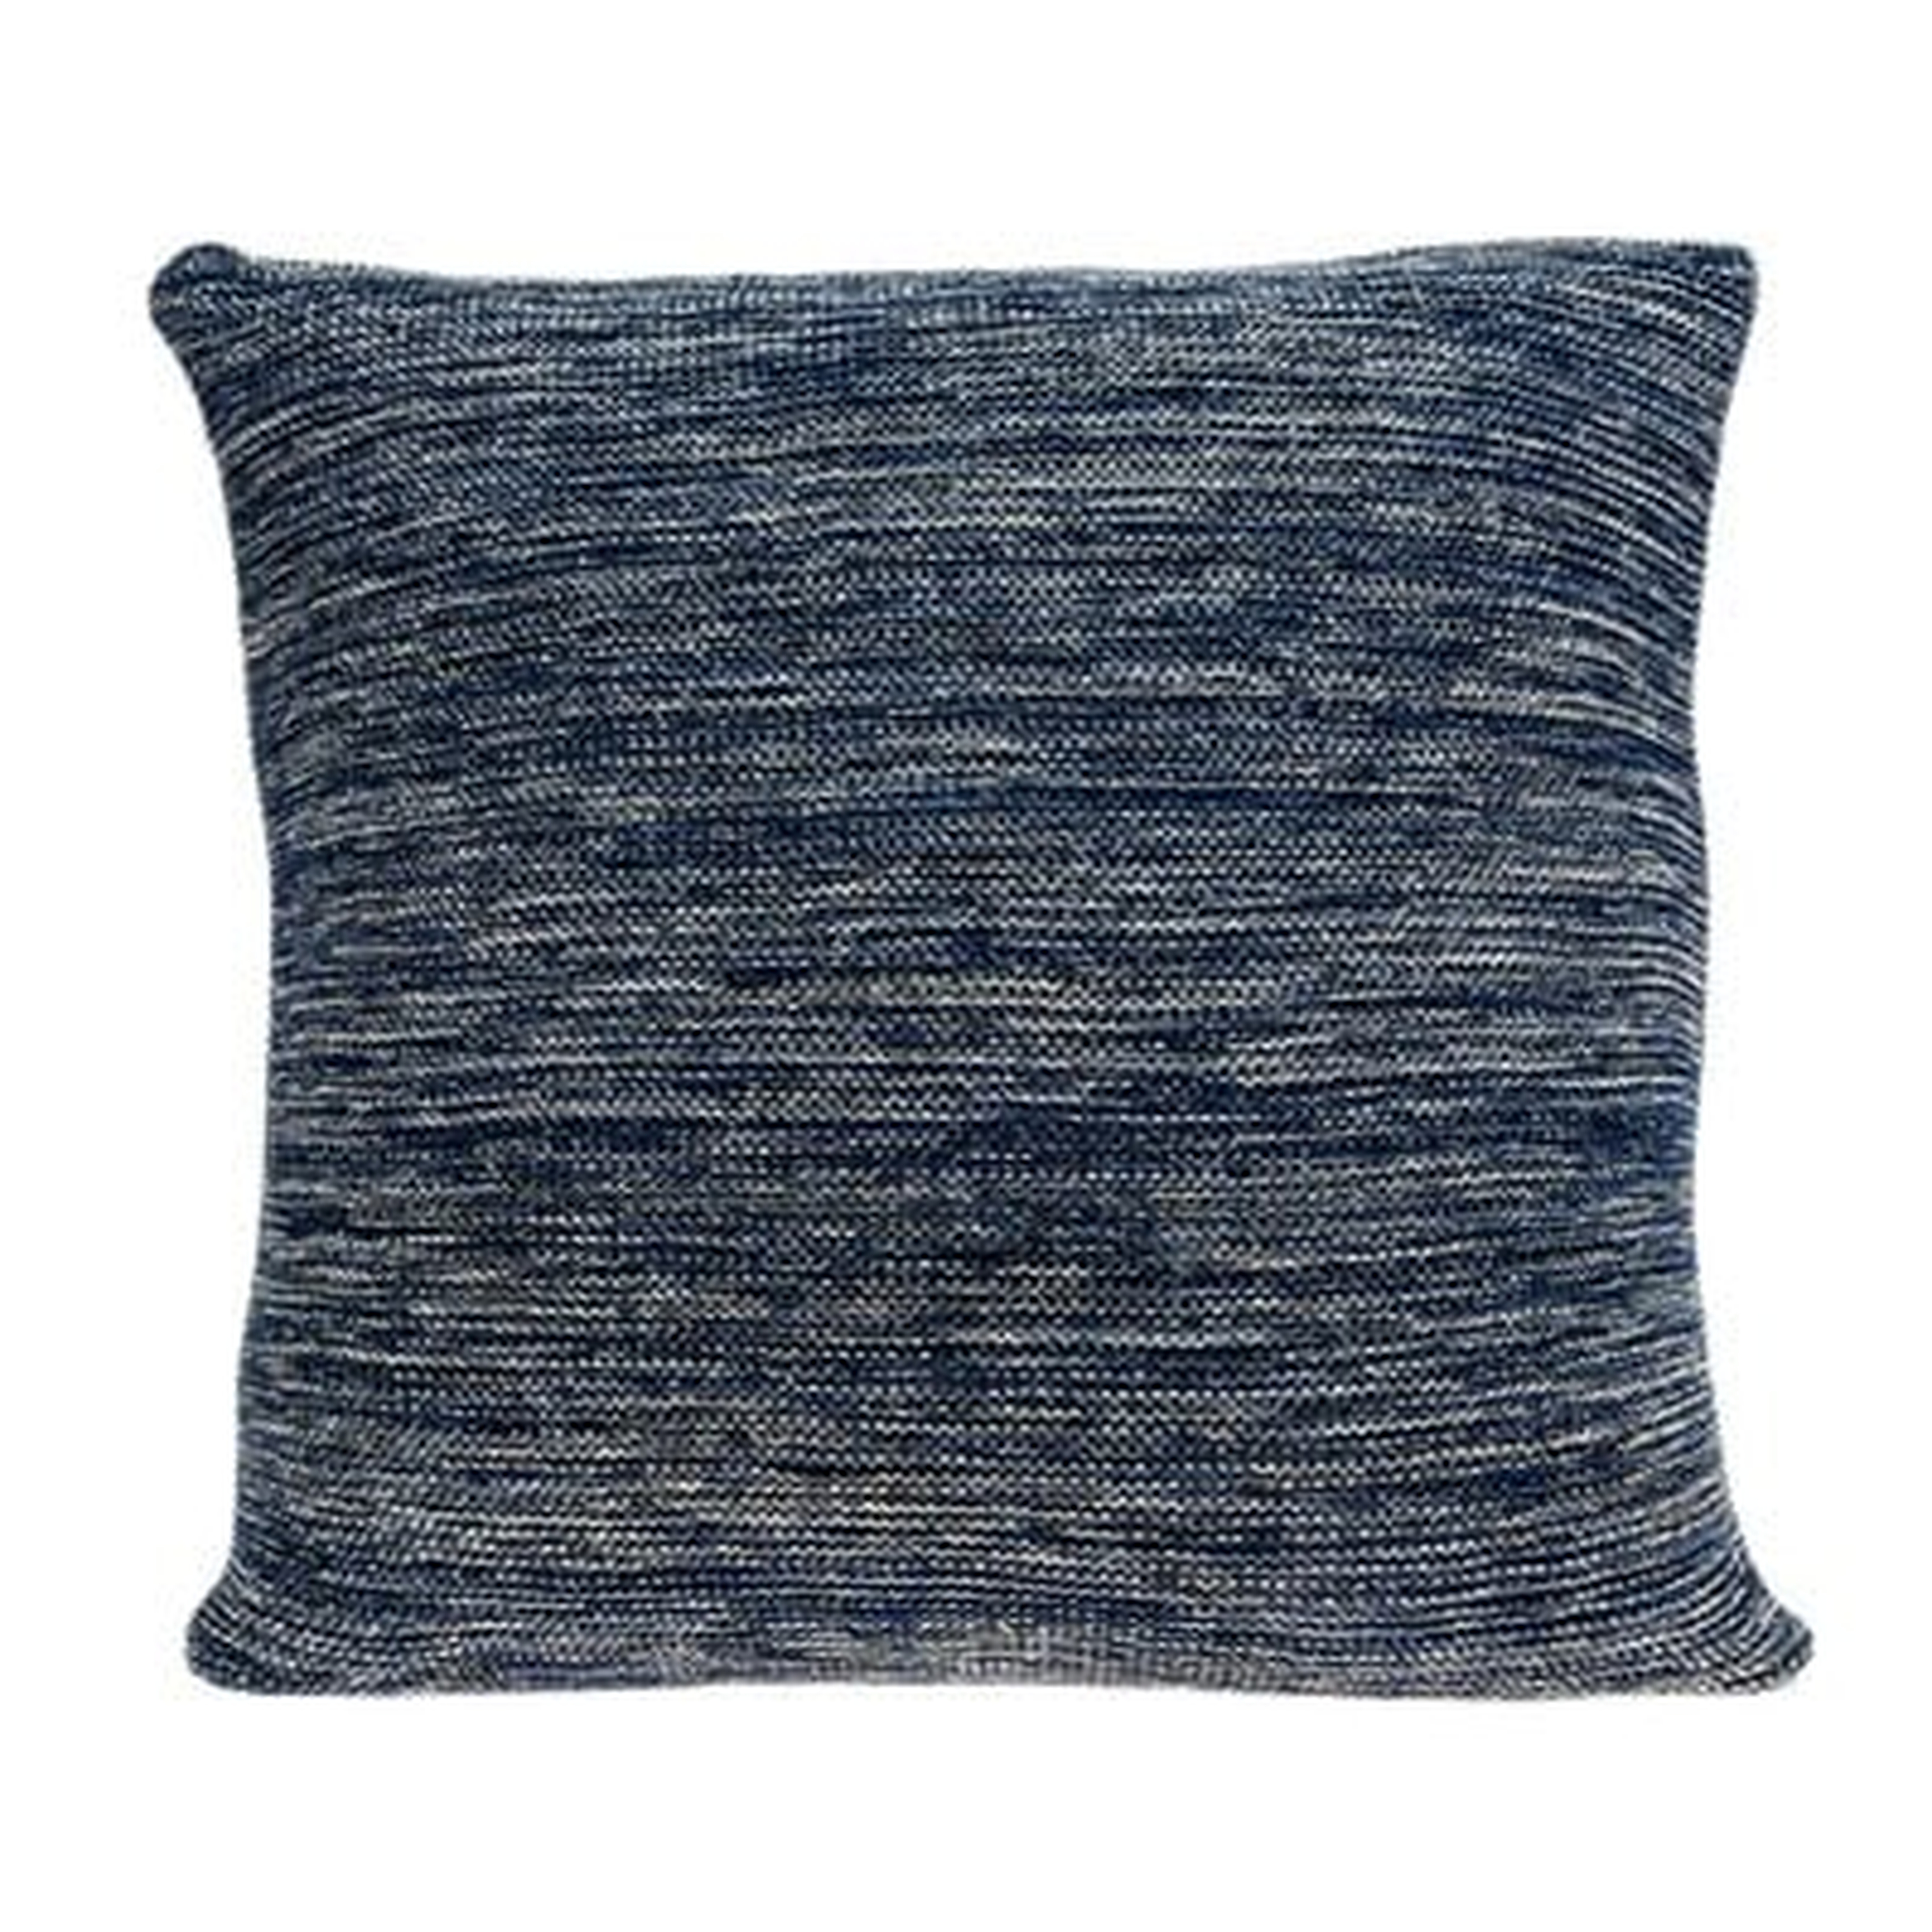 20" X 7" X 20" Decorative Transitional Blue Pillow Cover With Poly Insert - Wayfair